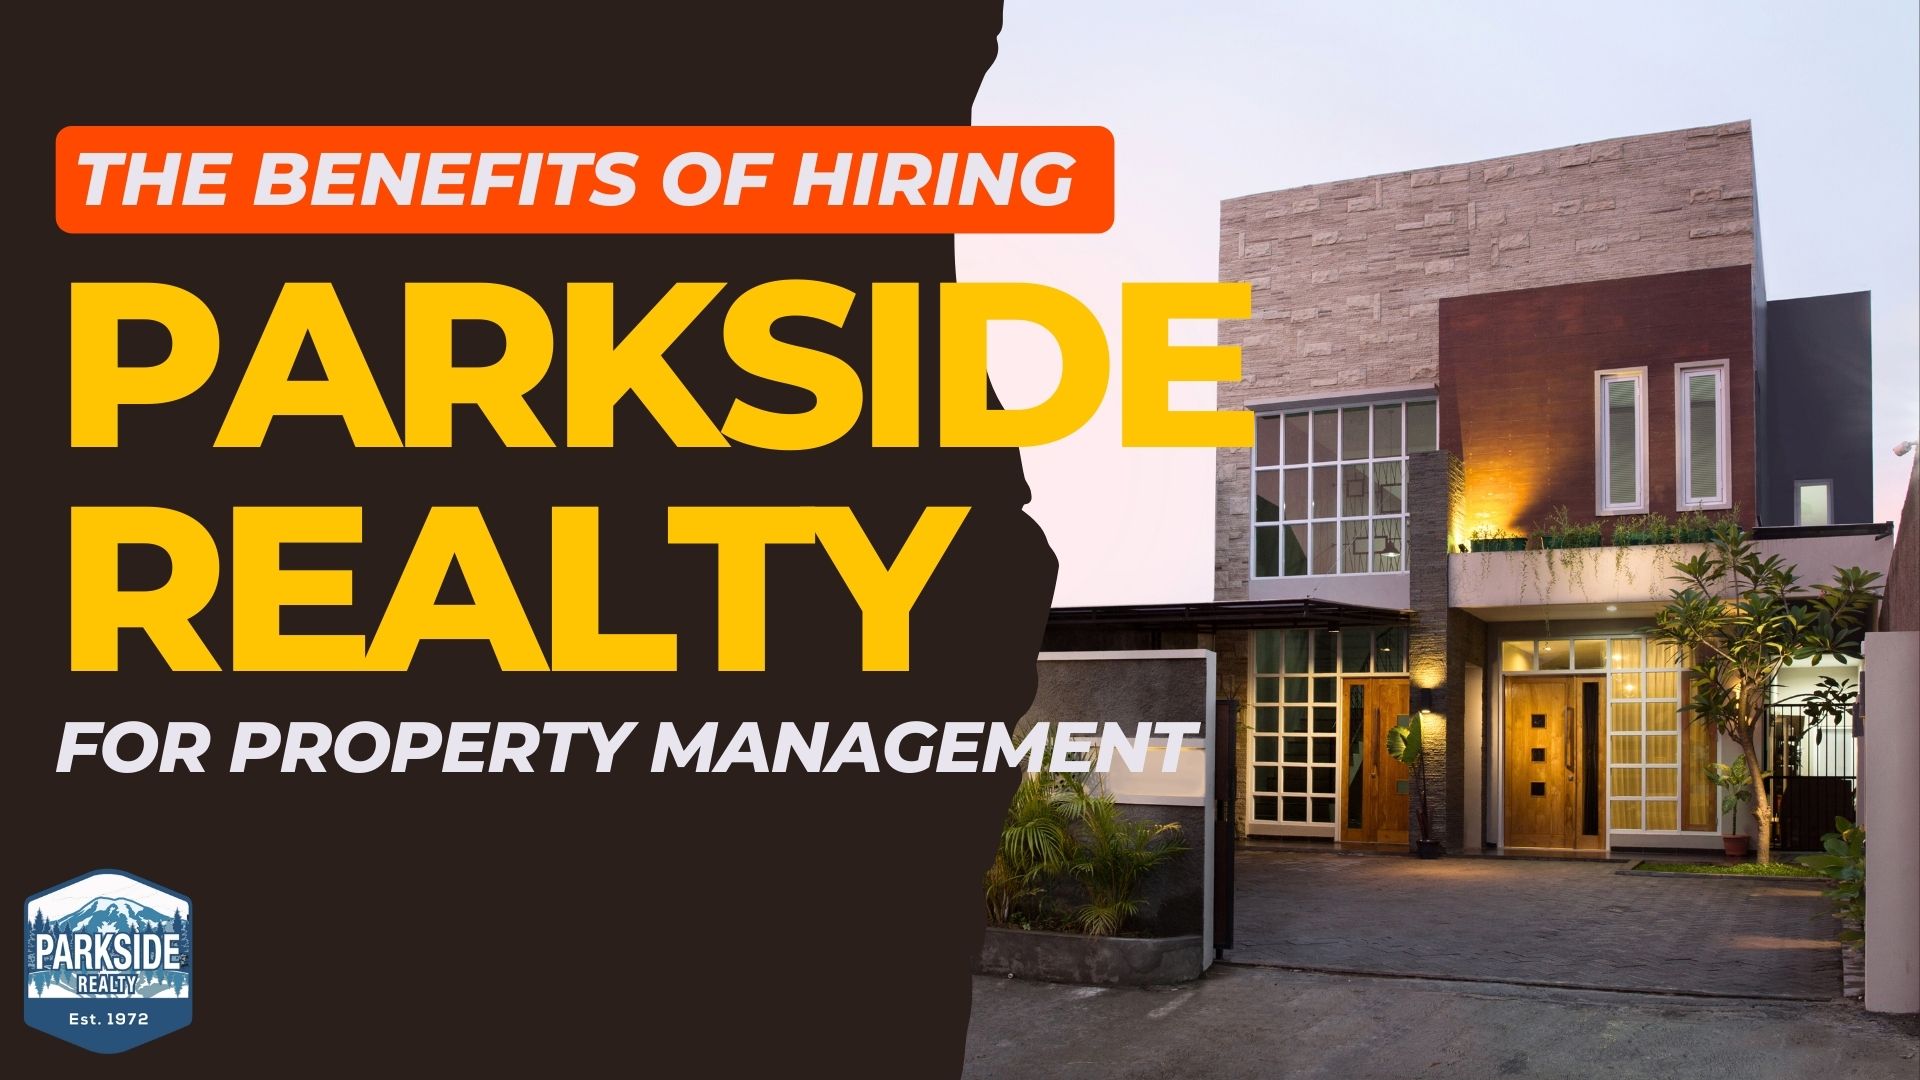 The Benefits of Hiring Parkside Realty for Property Management